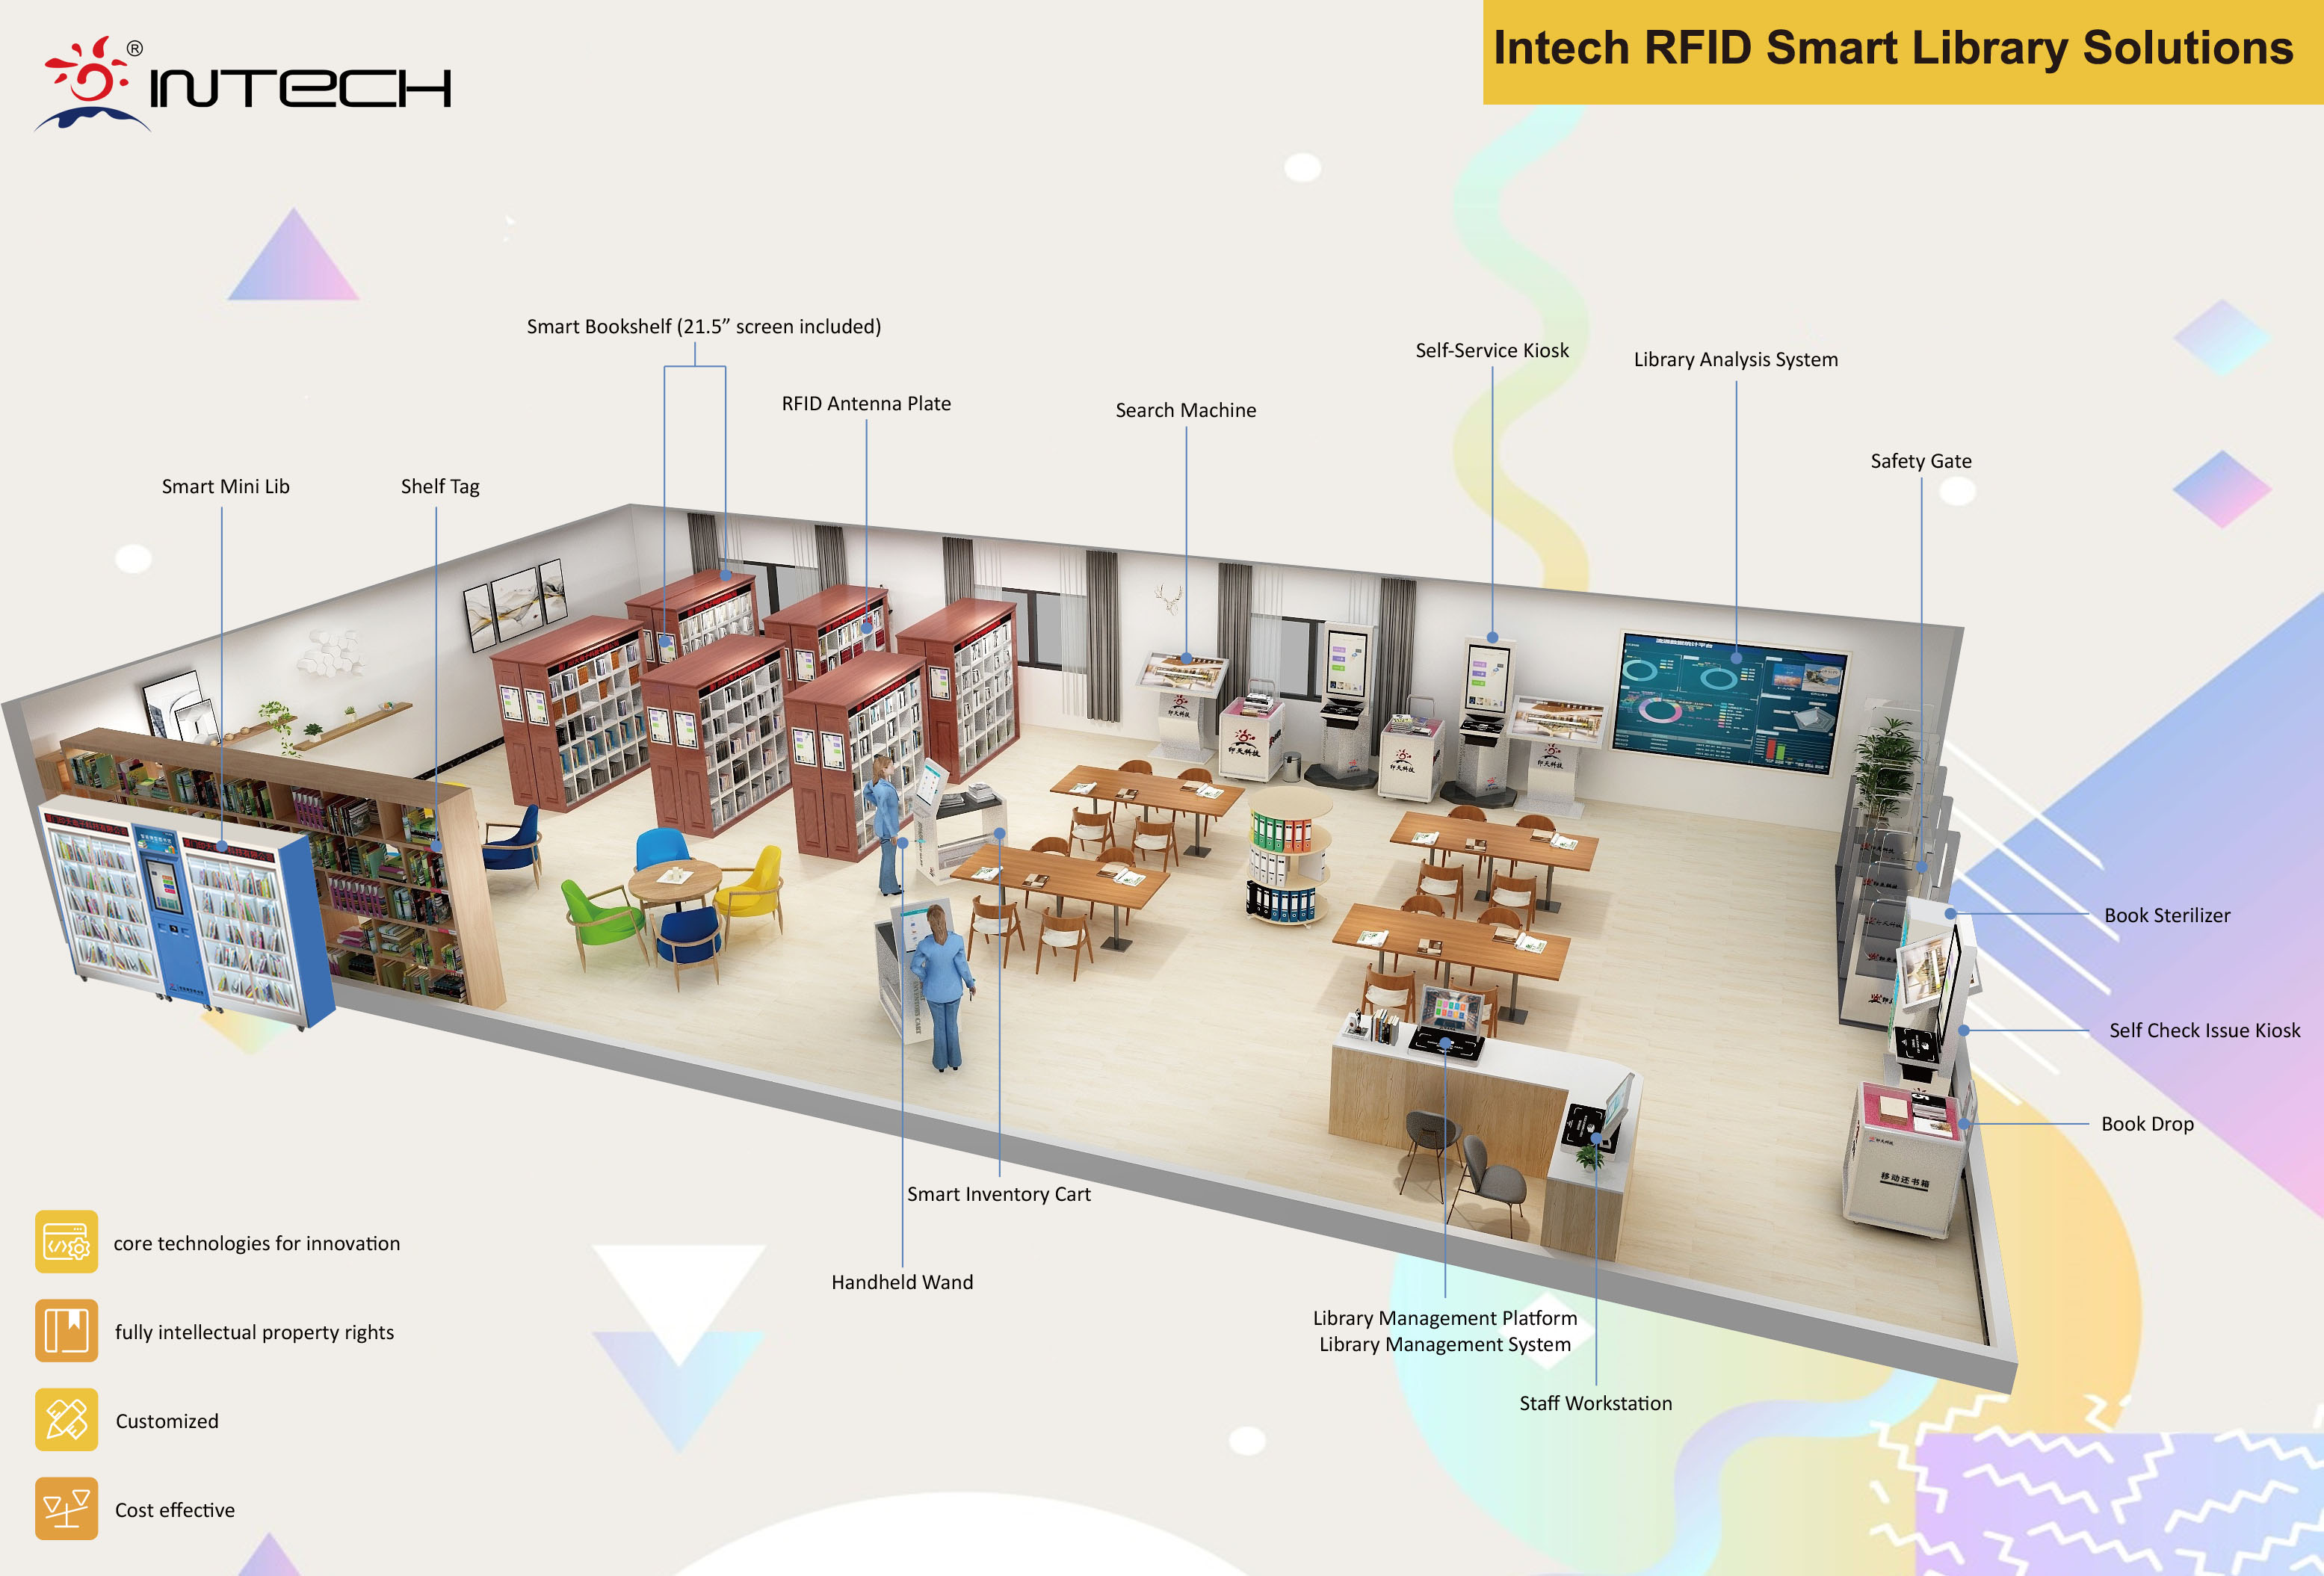 Intech smart library solutions